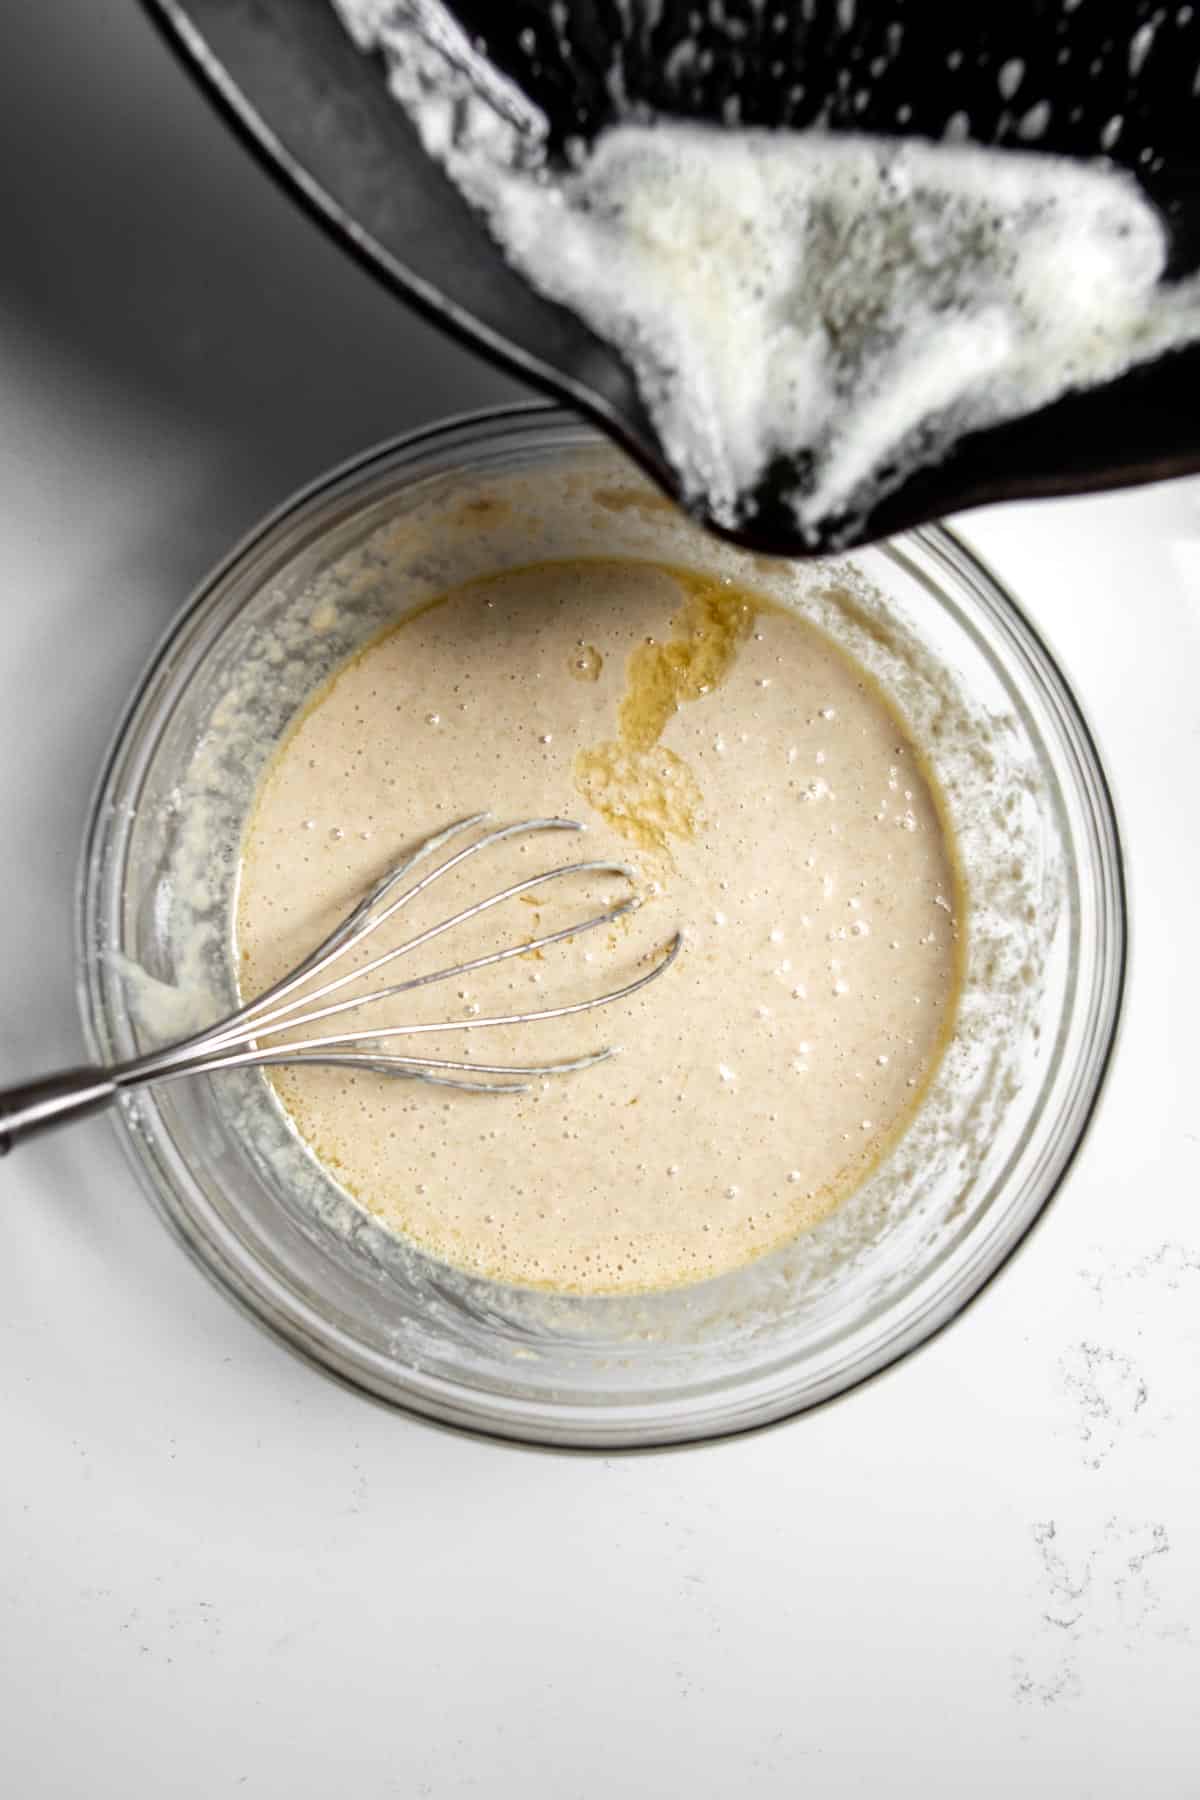 Melted butter being poured in a bowl with a whisk sitting in oat flour pancake batter from a skillet.